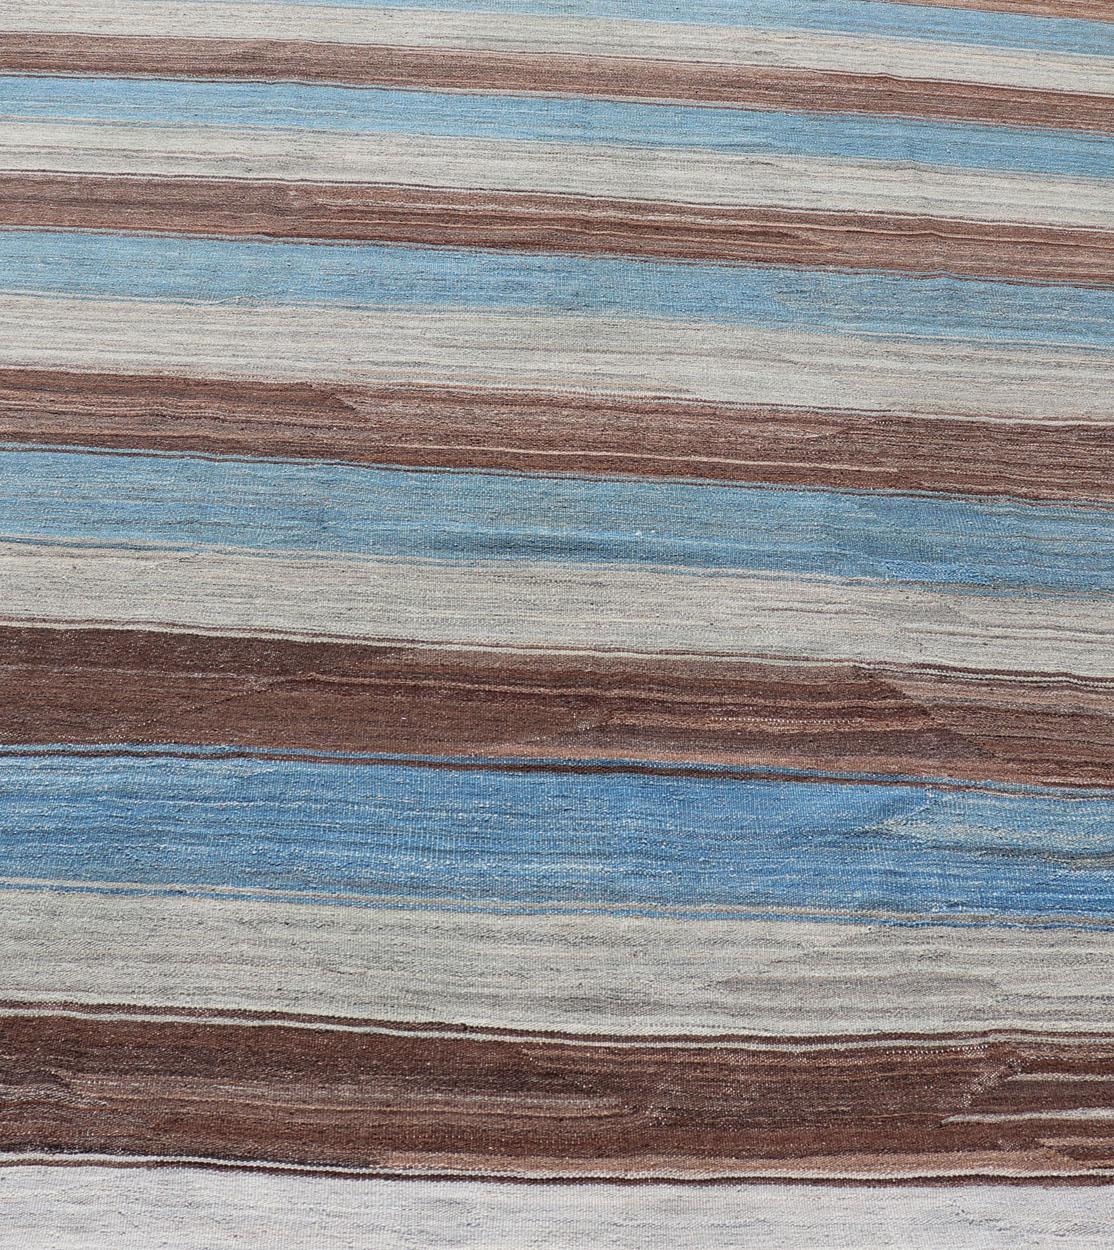 Hand-Knotted Modern Kilim Rug with Stripes in Shades of Blue, Brown, Light Gray and Cream For Sale